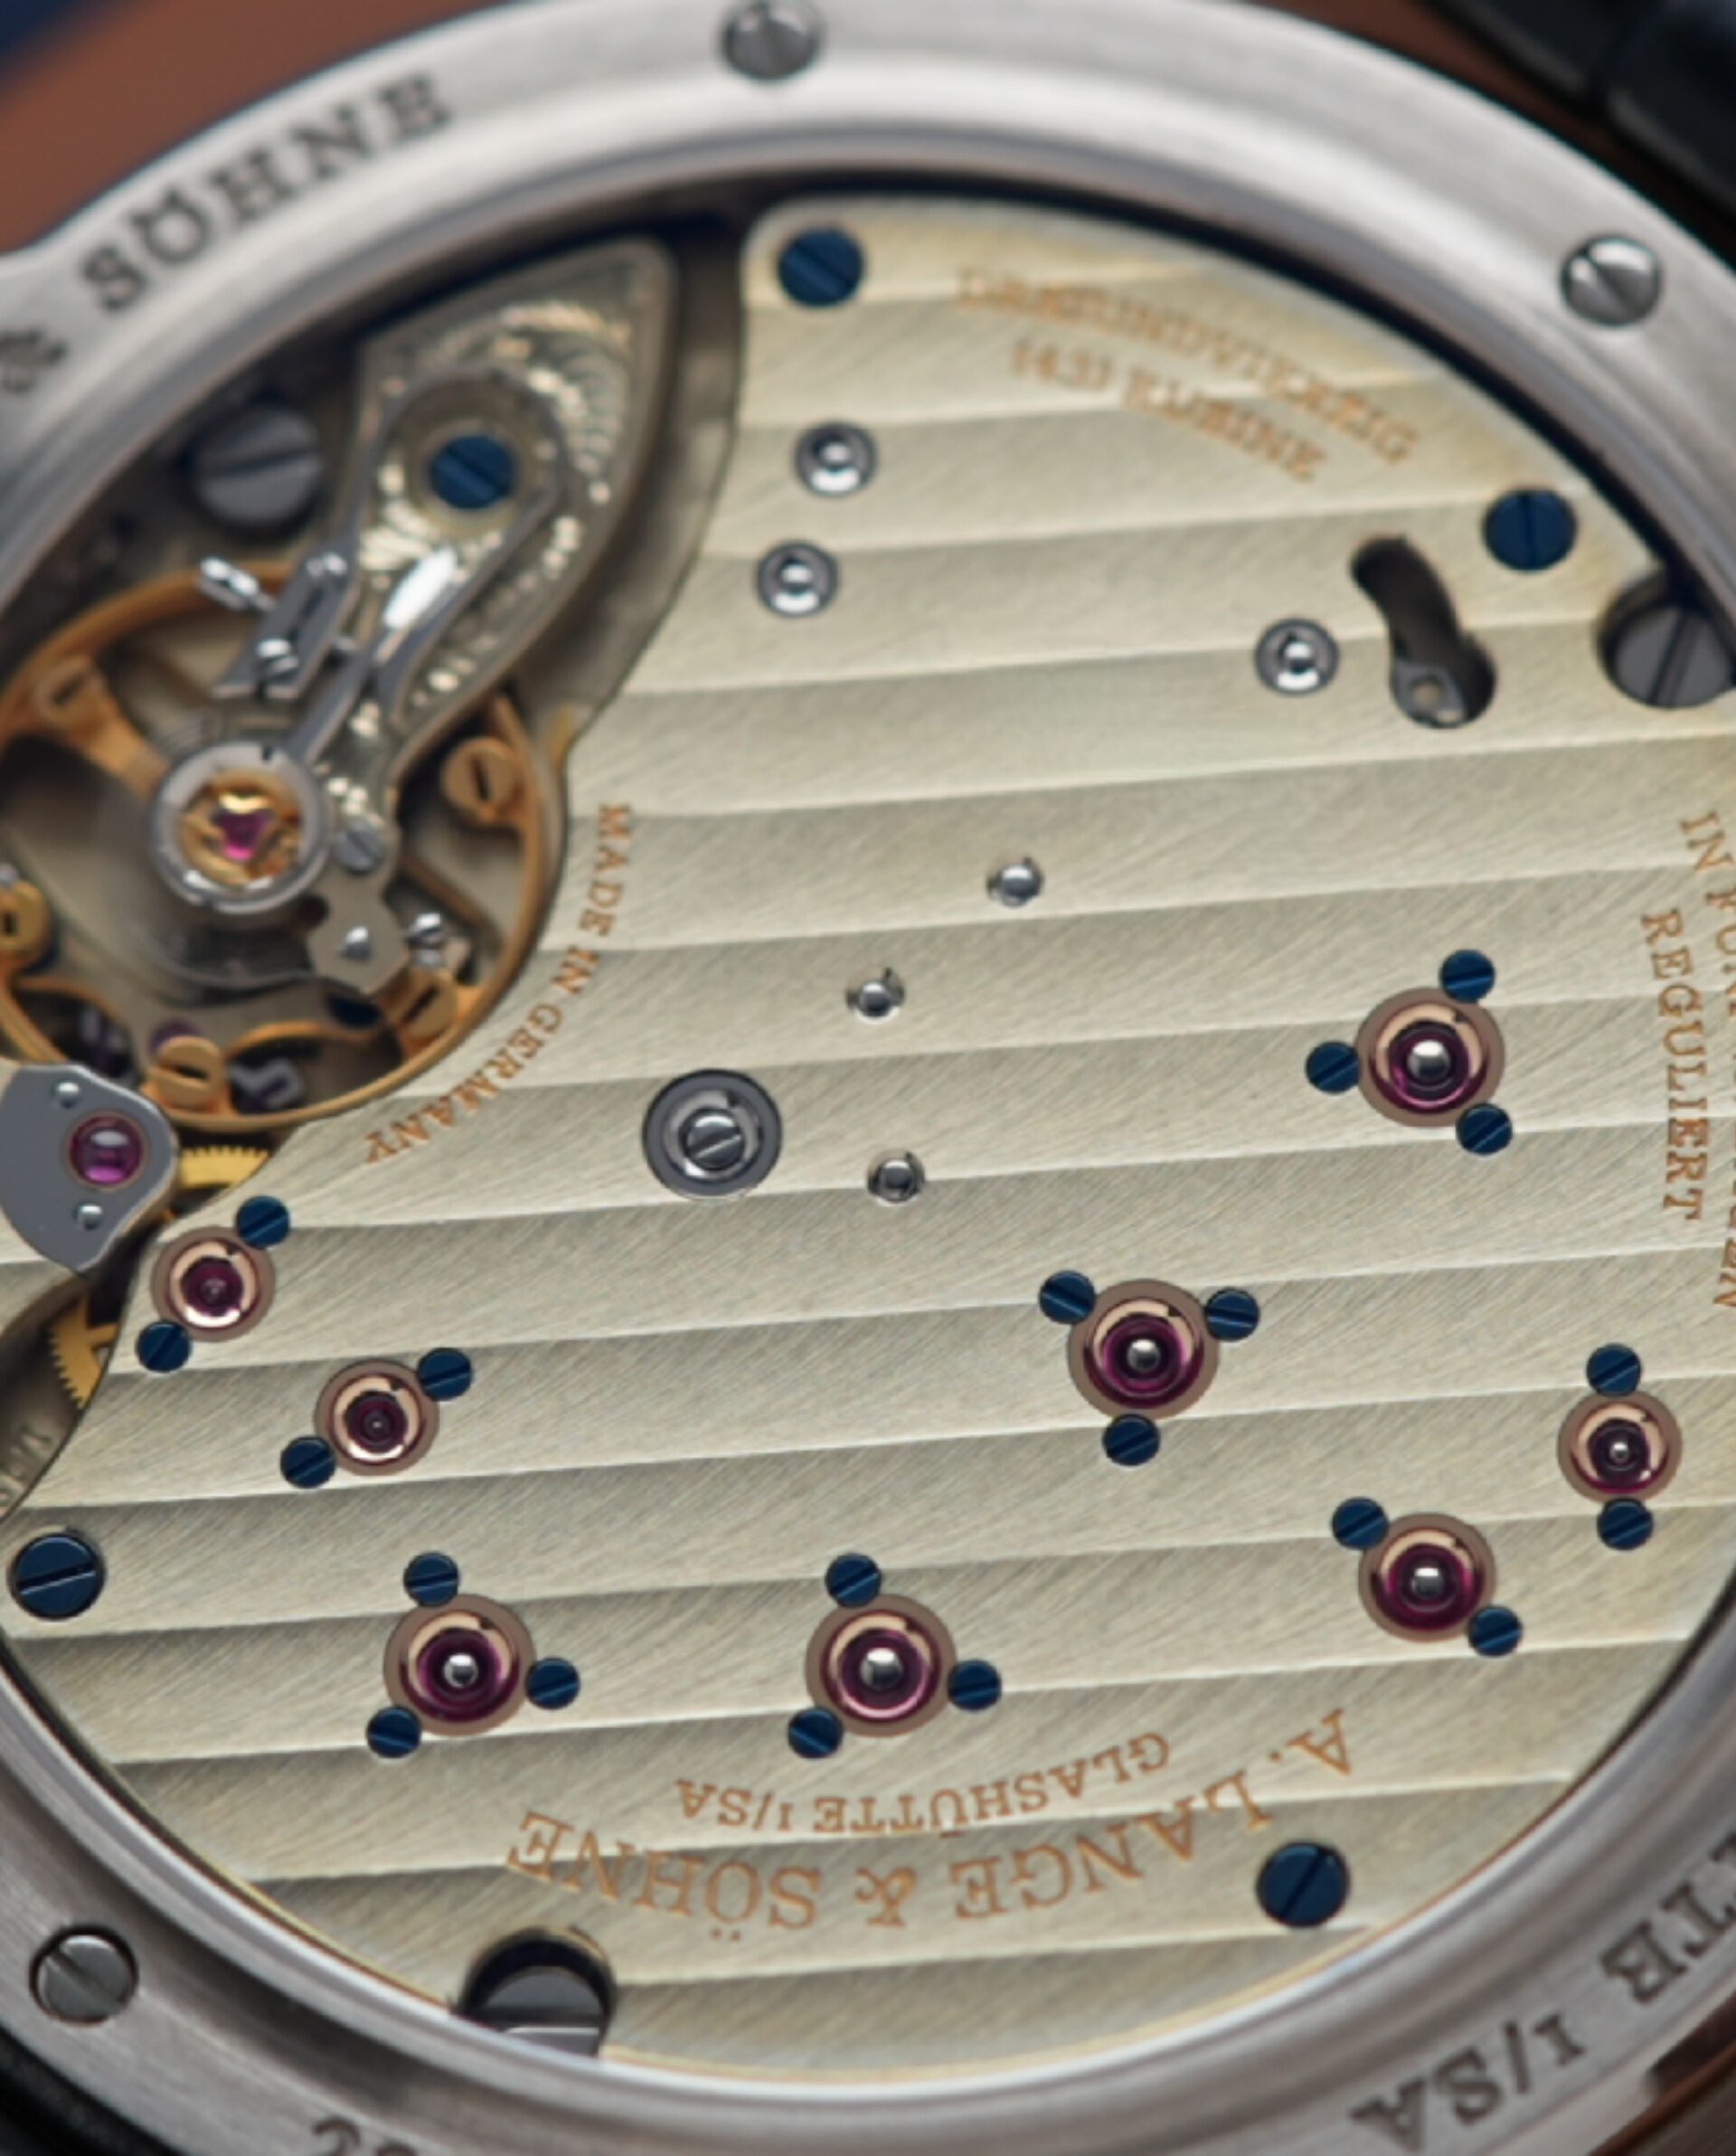 Exhibition caseback on the A. Lange & Söhne Lange 1 'Blue Series' 191.028 White Gold watch.